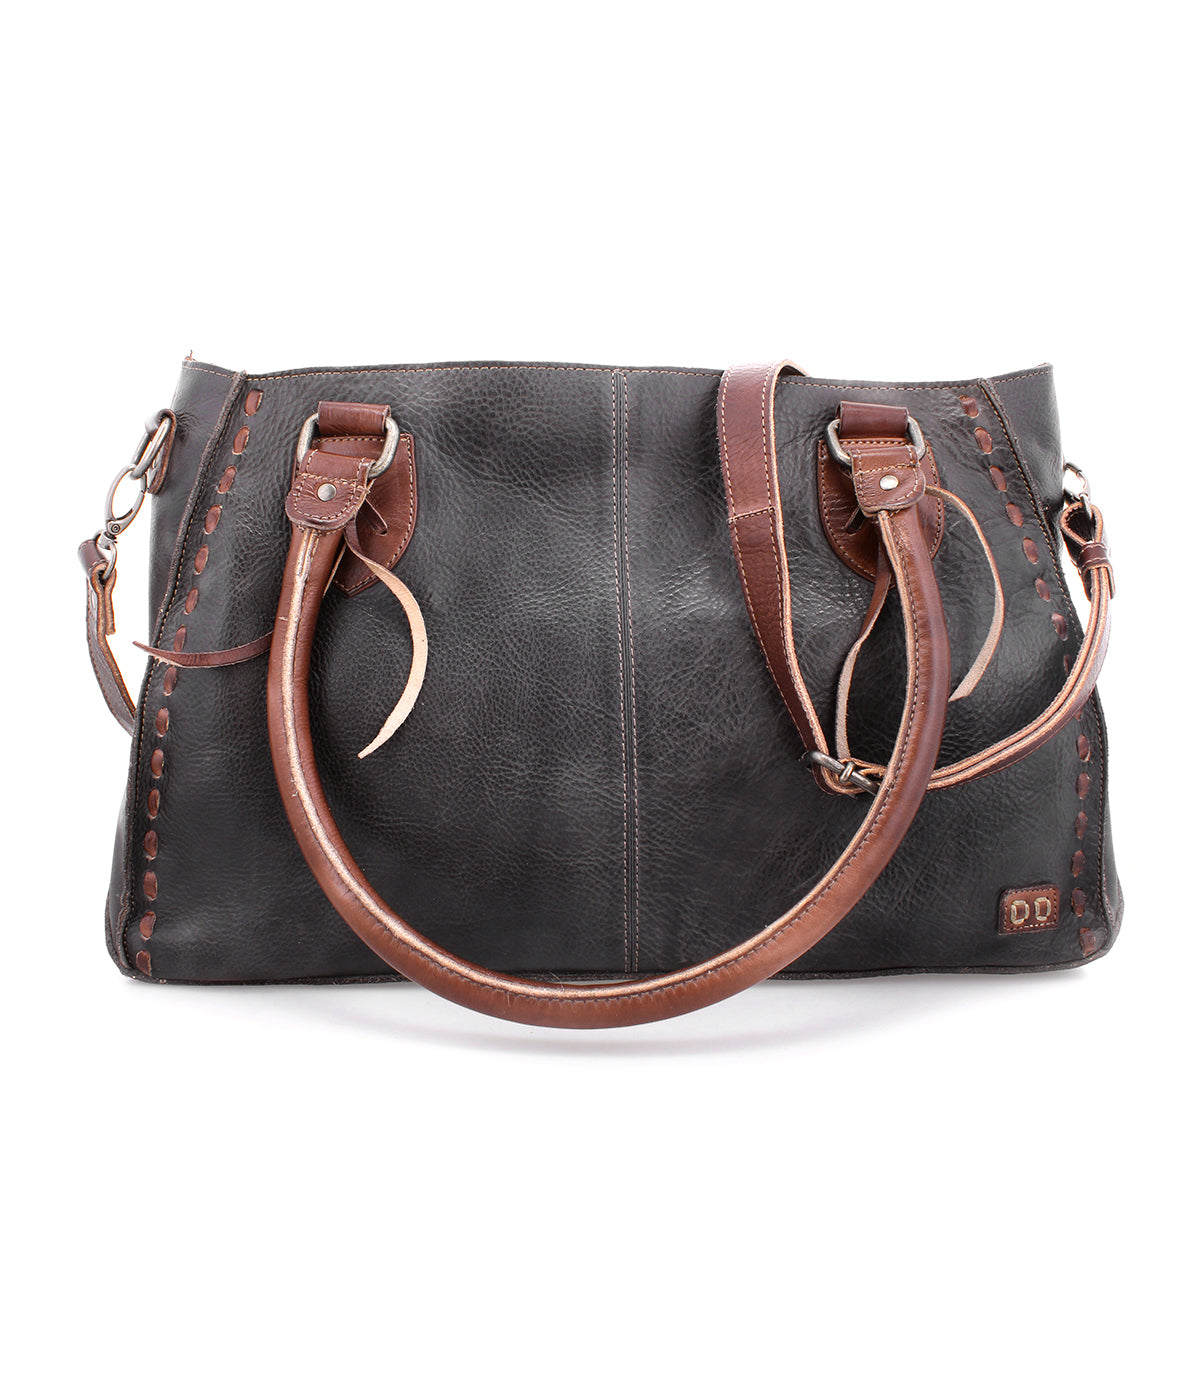 A Rockababy bag by Bed Stu, a compact option with black leather and brown handles.